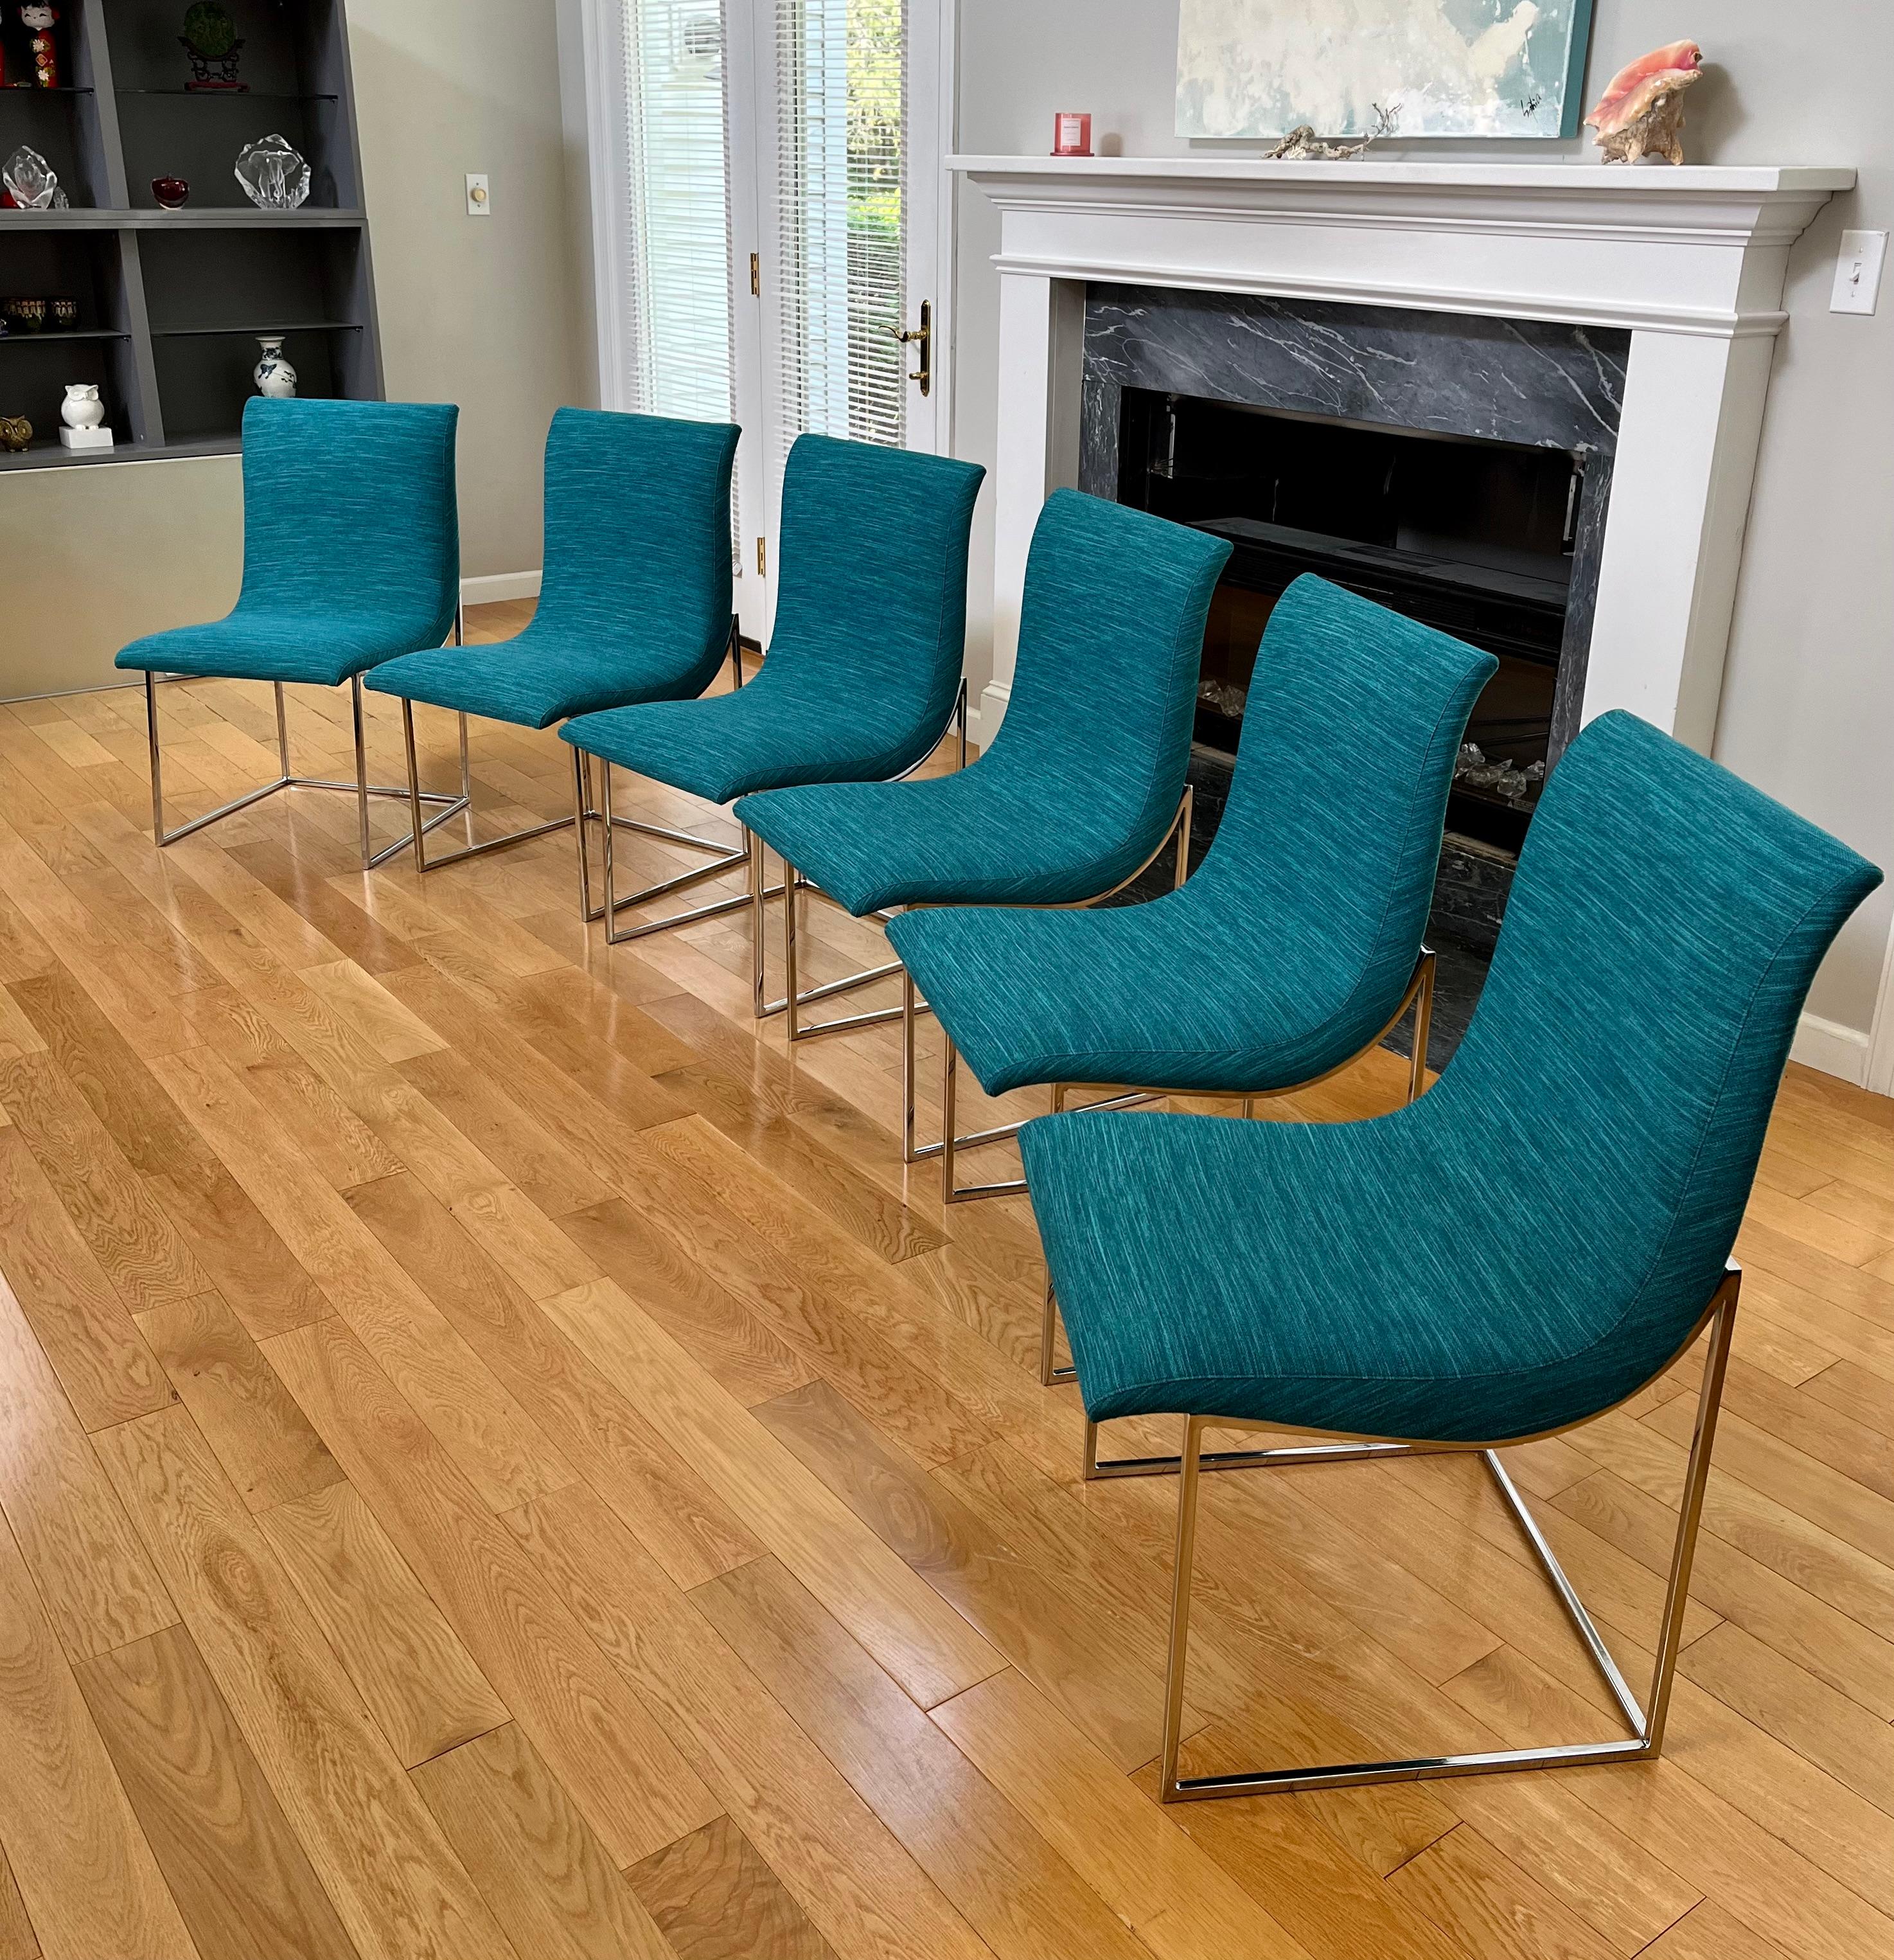 Polished Scoop Dining Chairs by Milo Baughman for Thayer Coggin in Caribbean 'Aqua' Color For Sale